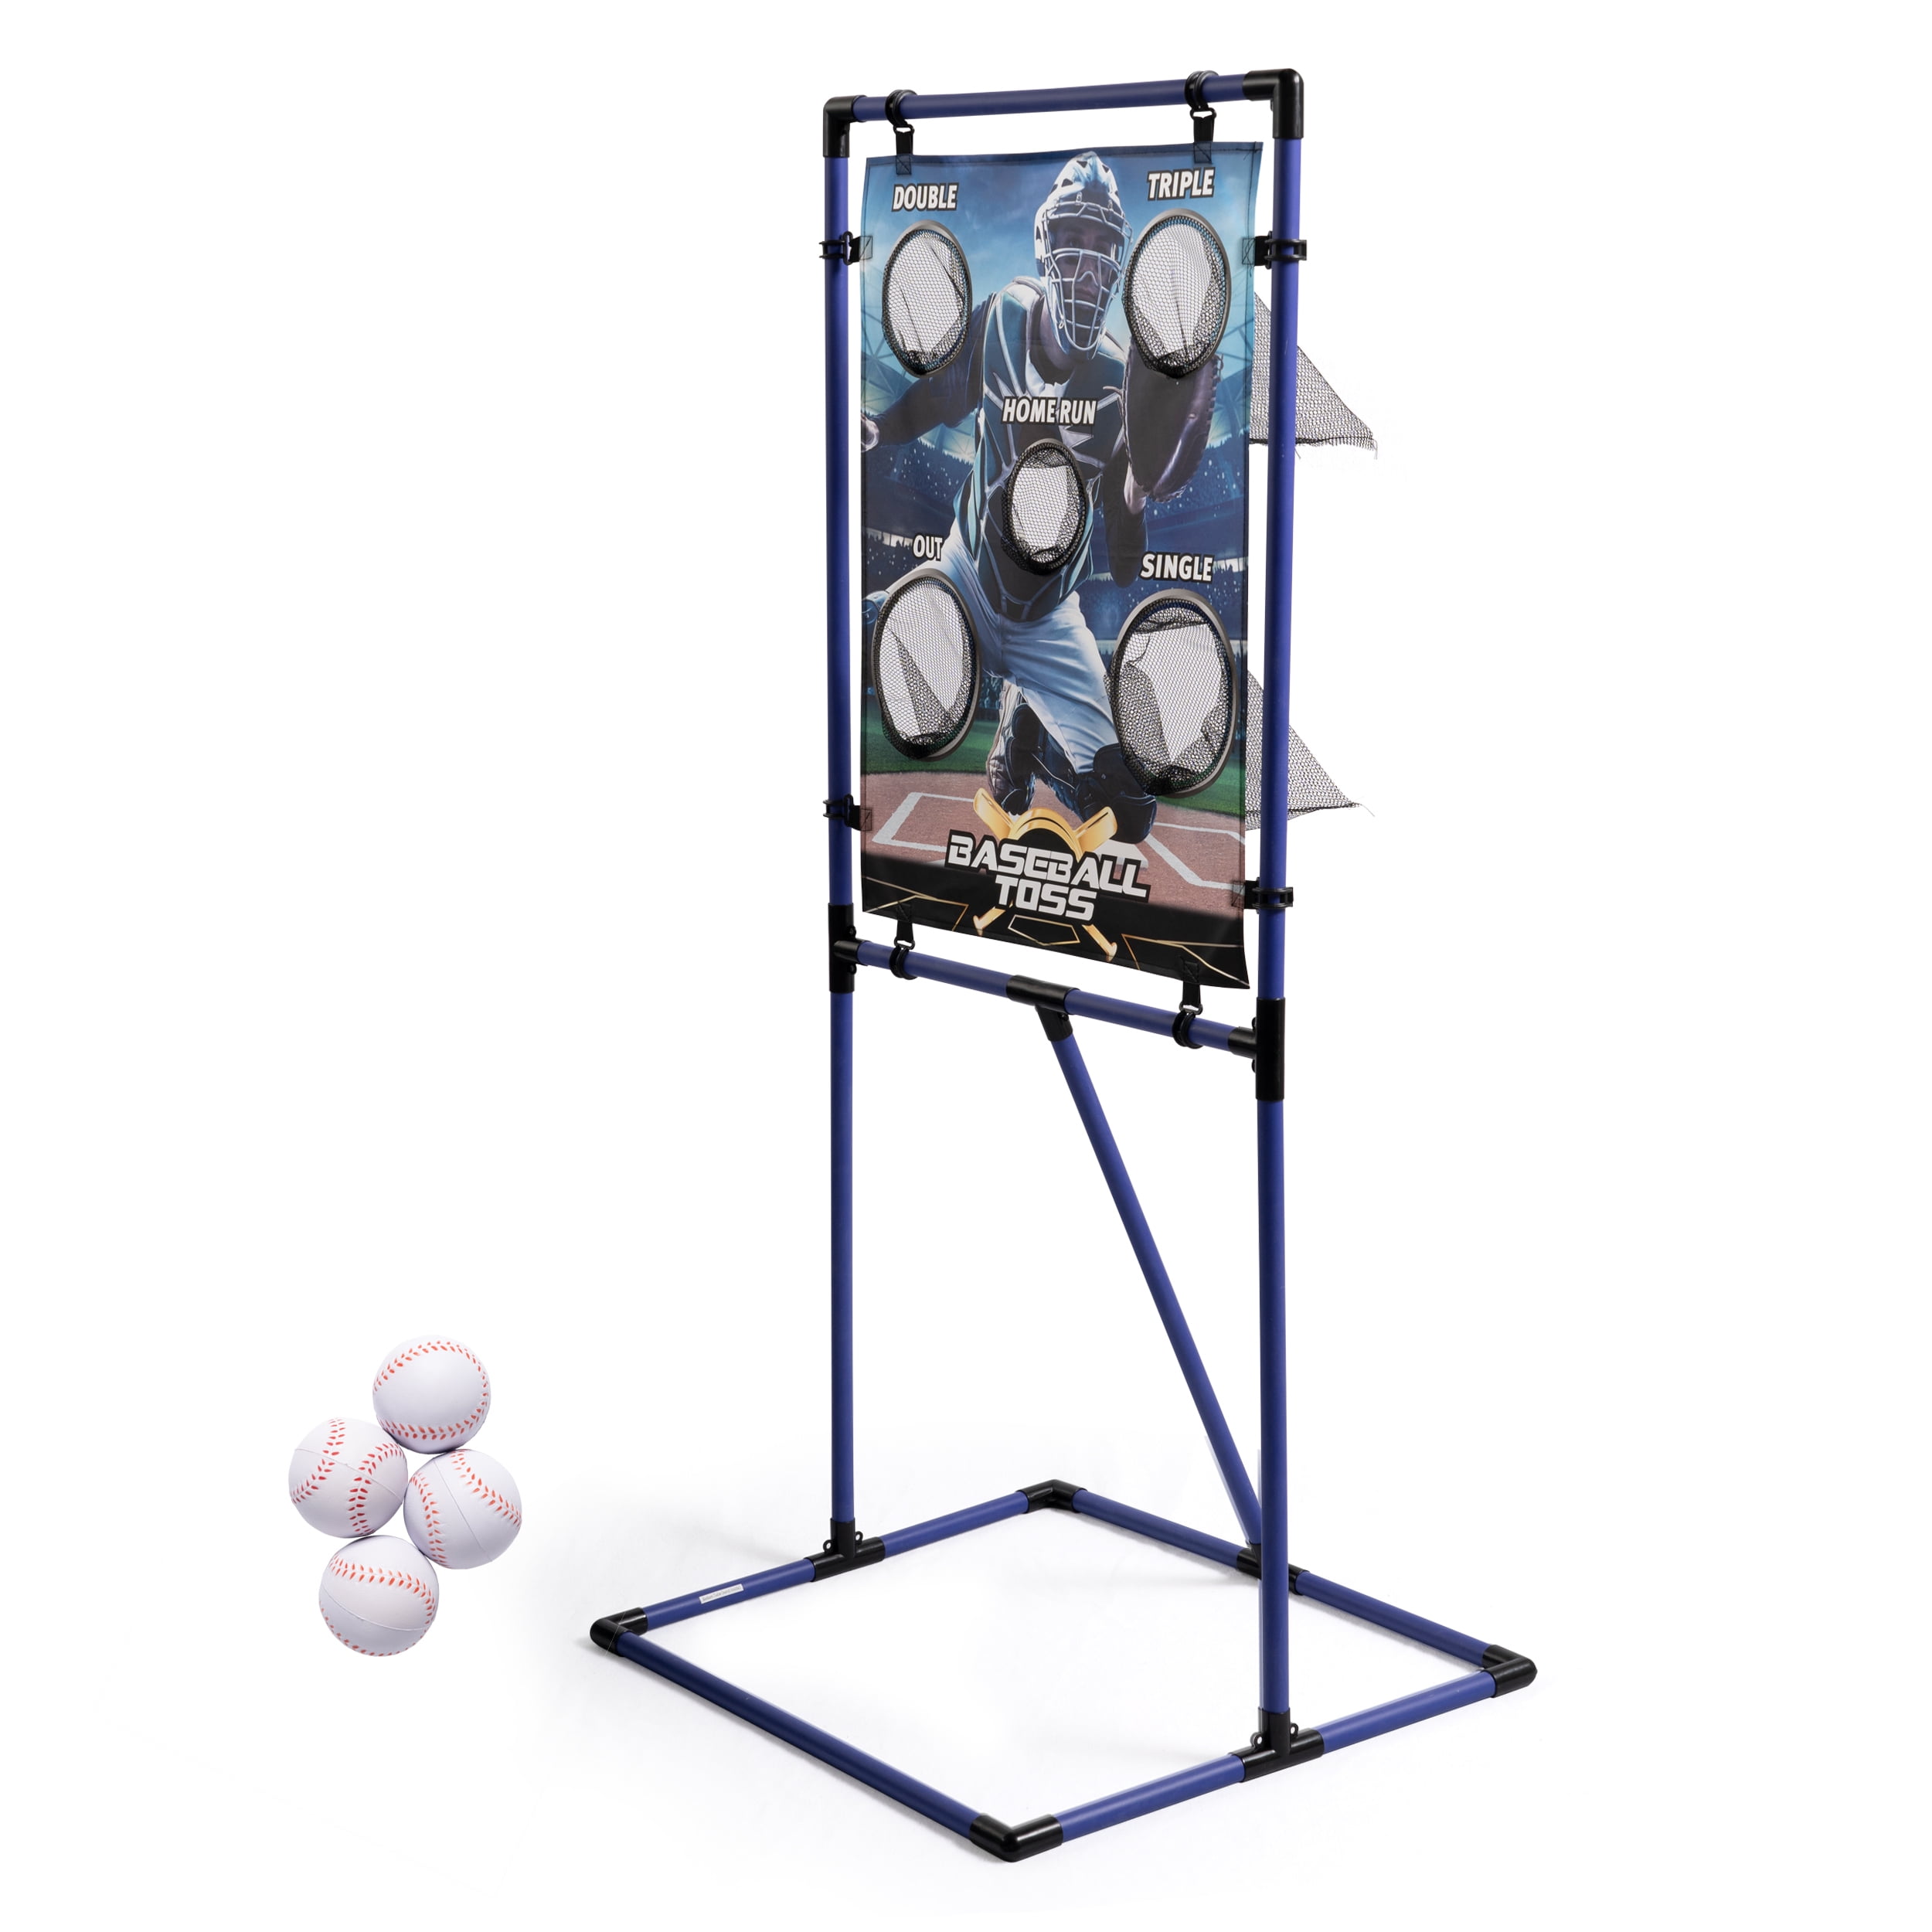 or Backyard Fun Portable Indoor or Outdoor Design for Cookouts Tailgates Sport Squad Target Toss Game Set Choose Either Football Toss or Baseball Toss 